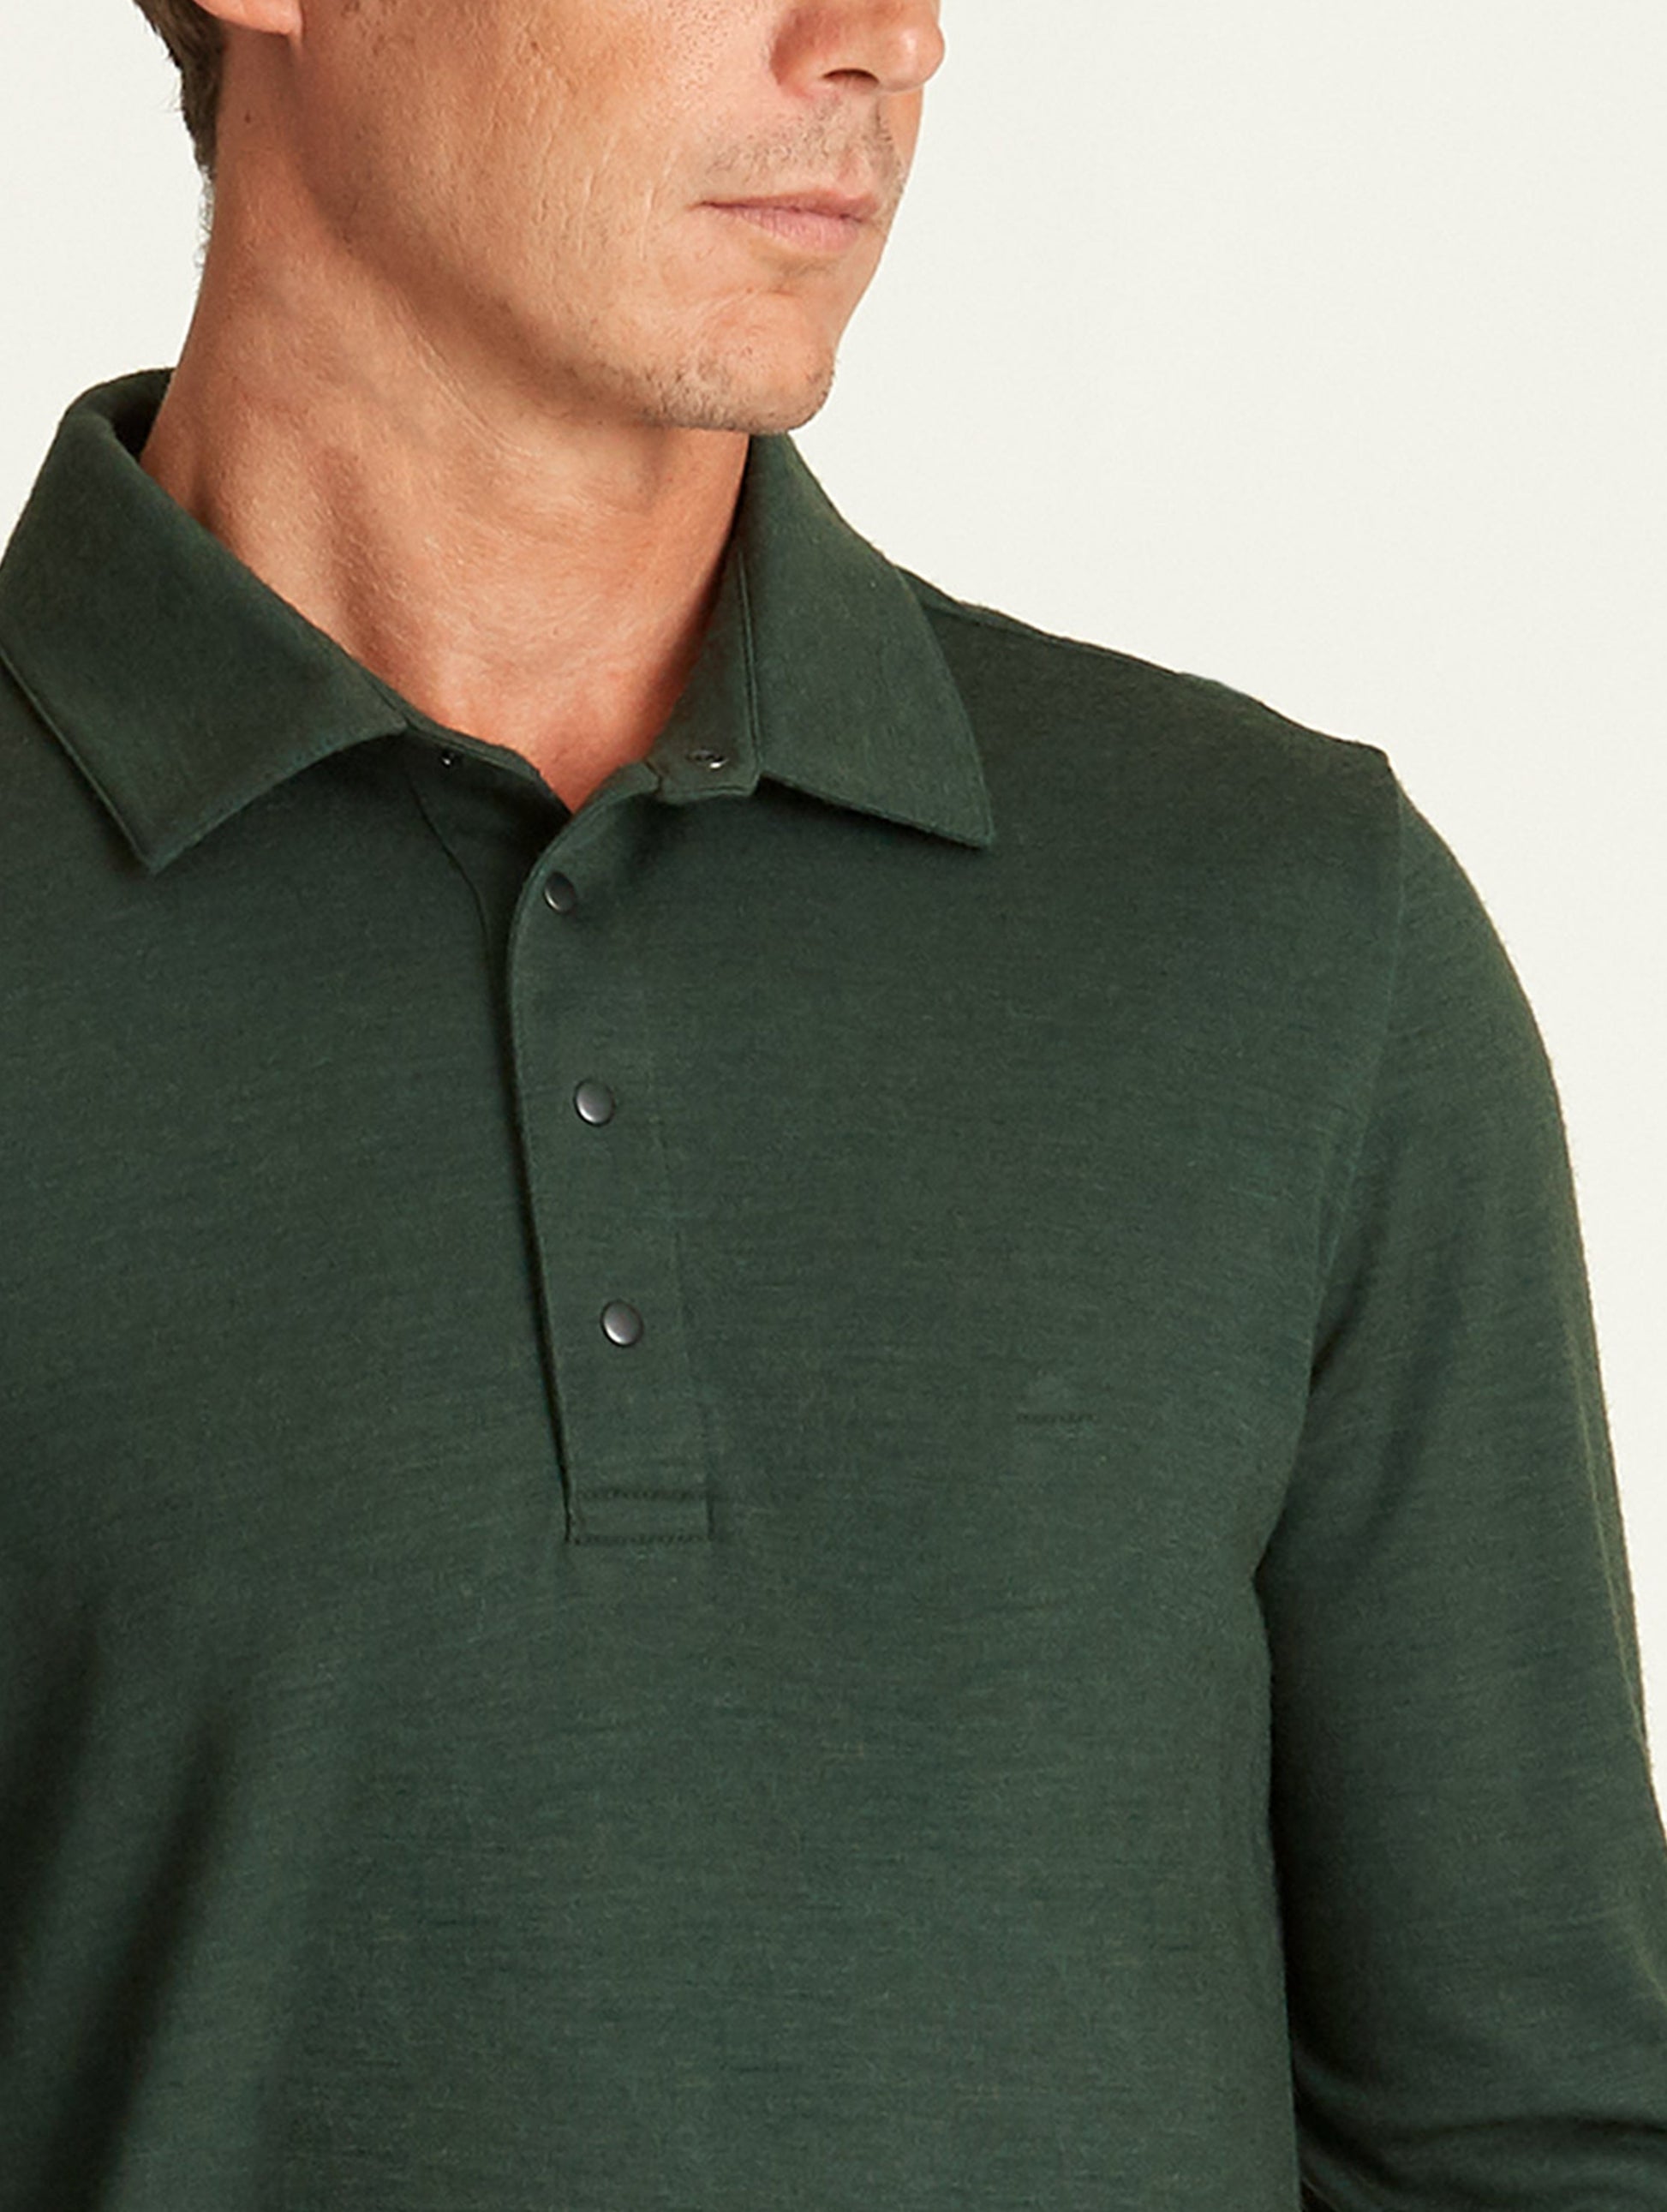 polo shirt for men from Aether Apparel